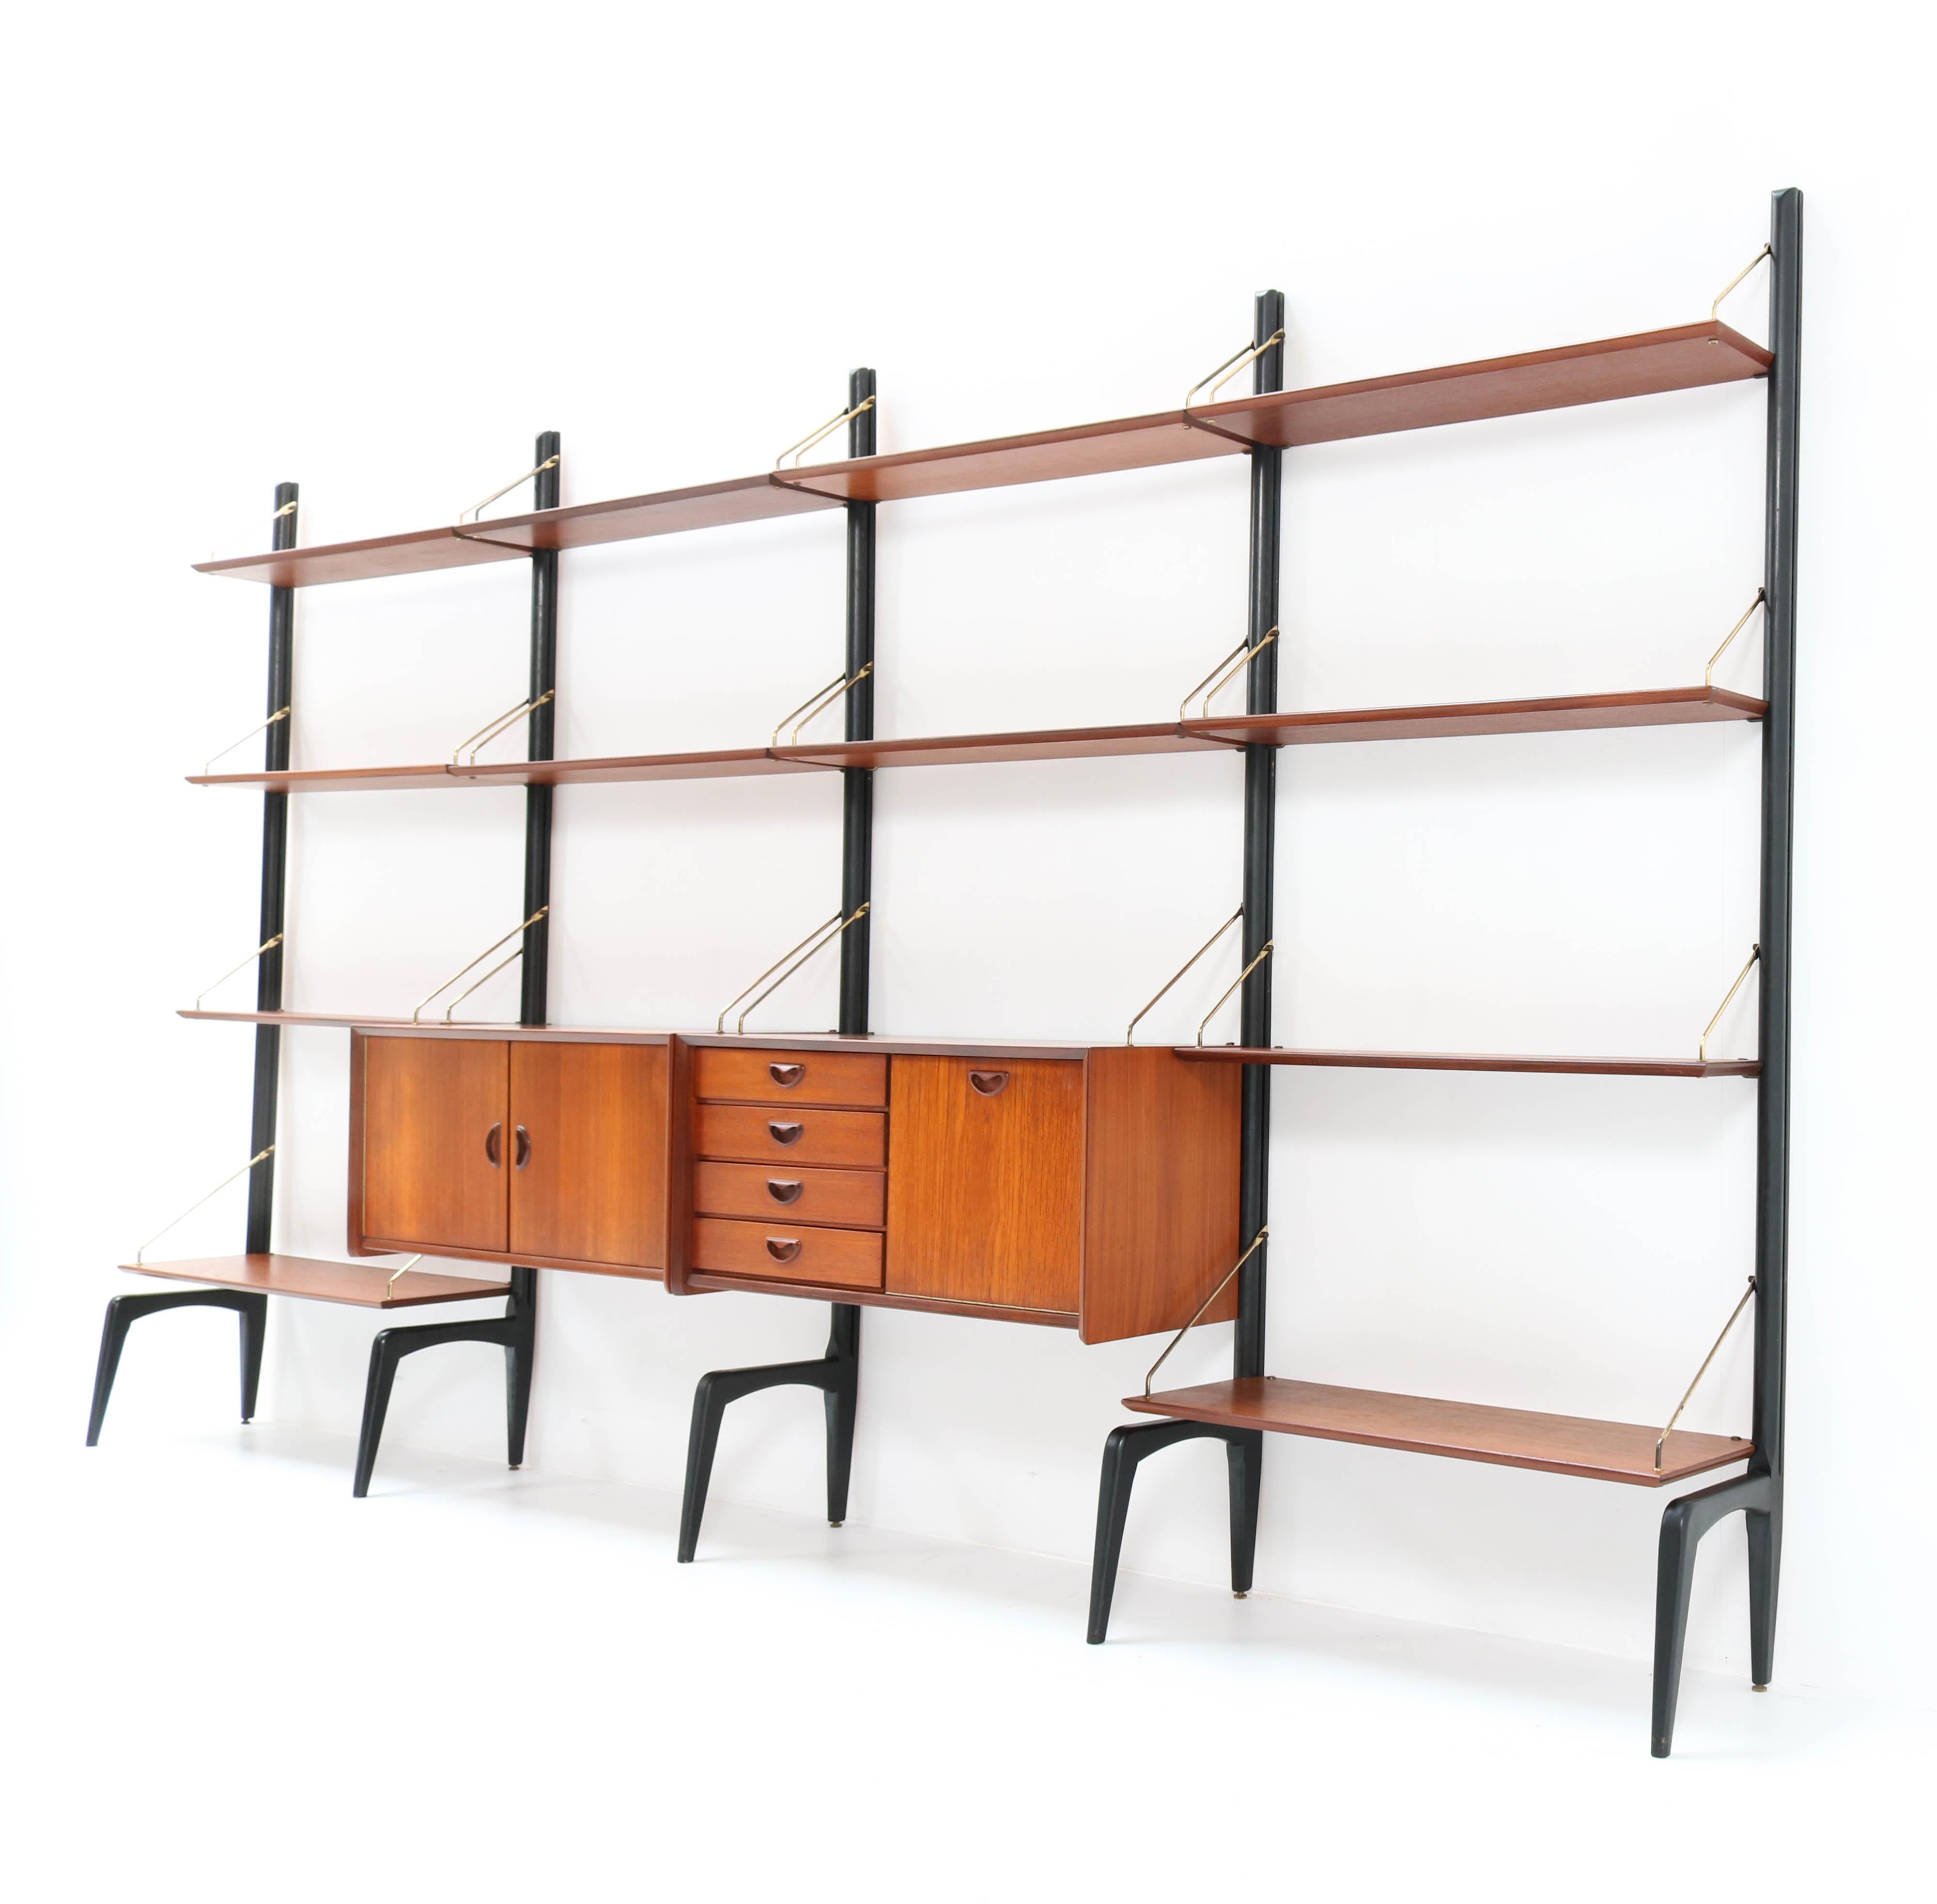 Mid-20th Century Large Mid-Century Modern Free Standing Wall Unit by Louis Van Teeffelen for Webe